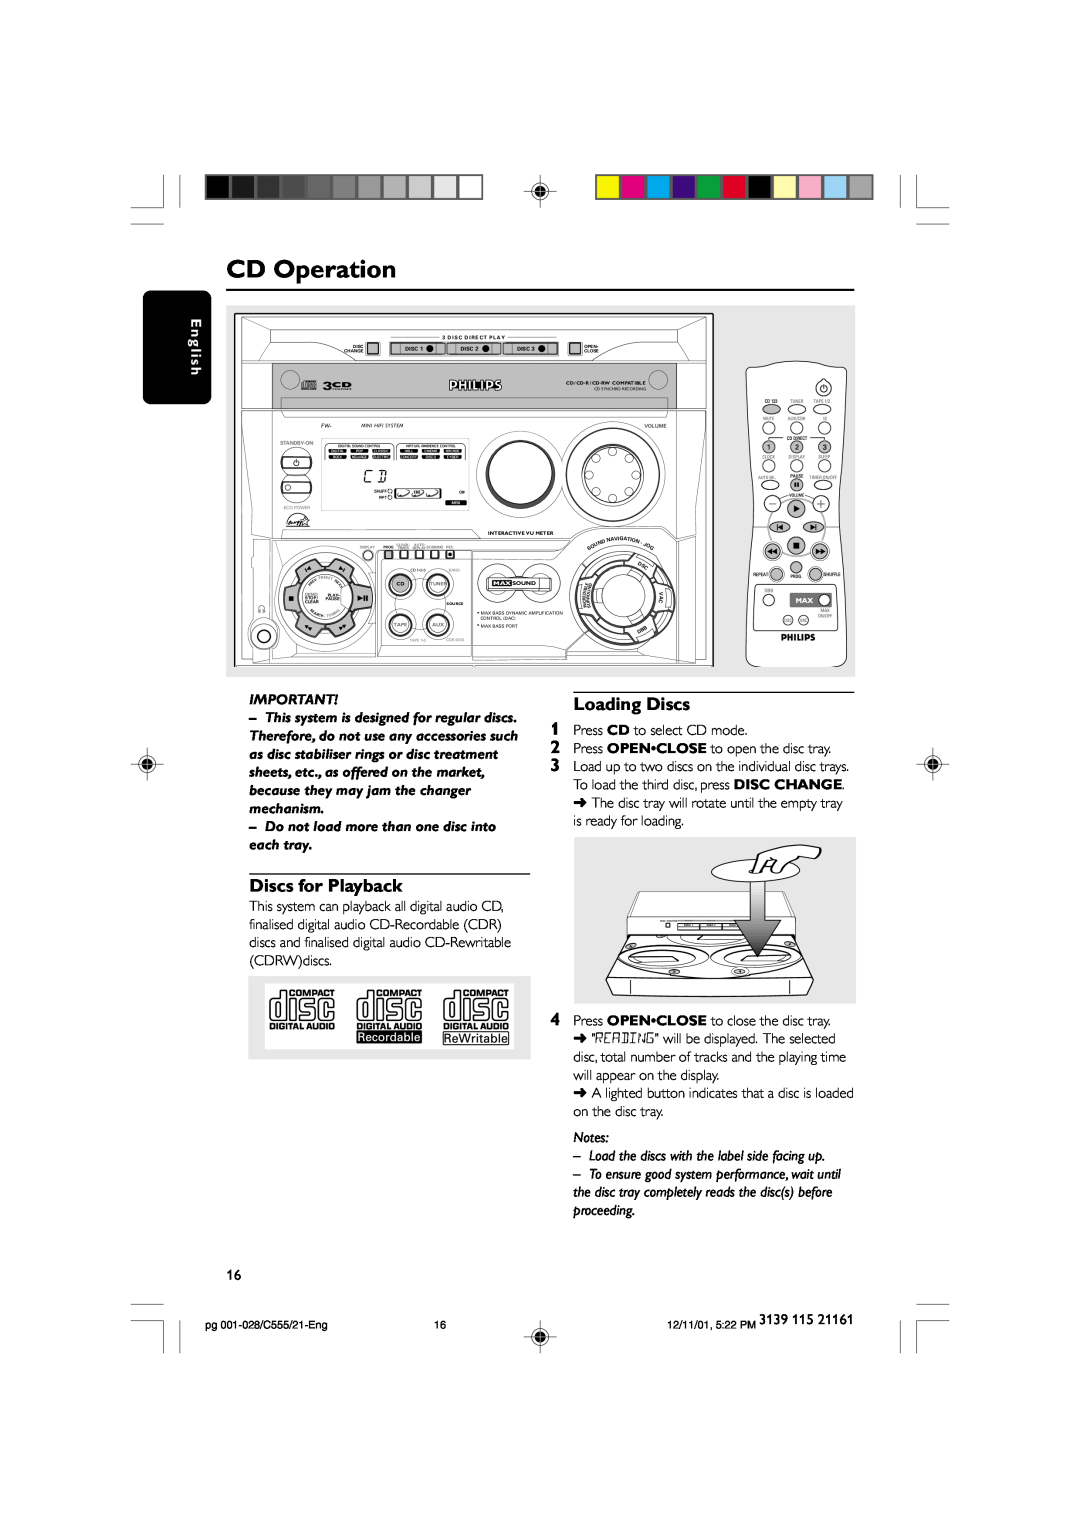 Philips manual CD Operation, Discs for Playback, Loading Discs, E n g l i s h, pg 001-028/C555/21-Eng, 12/11/01, 5 22 PM 